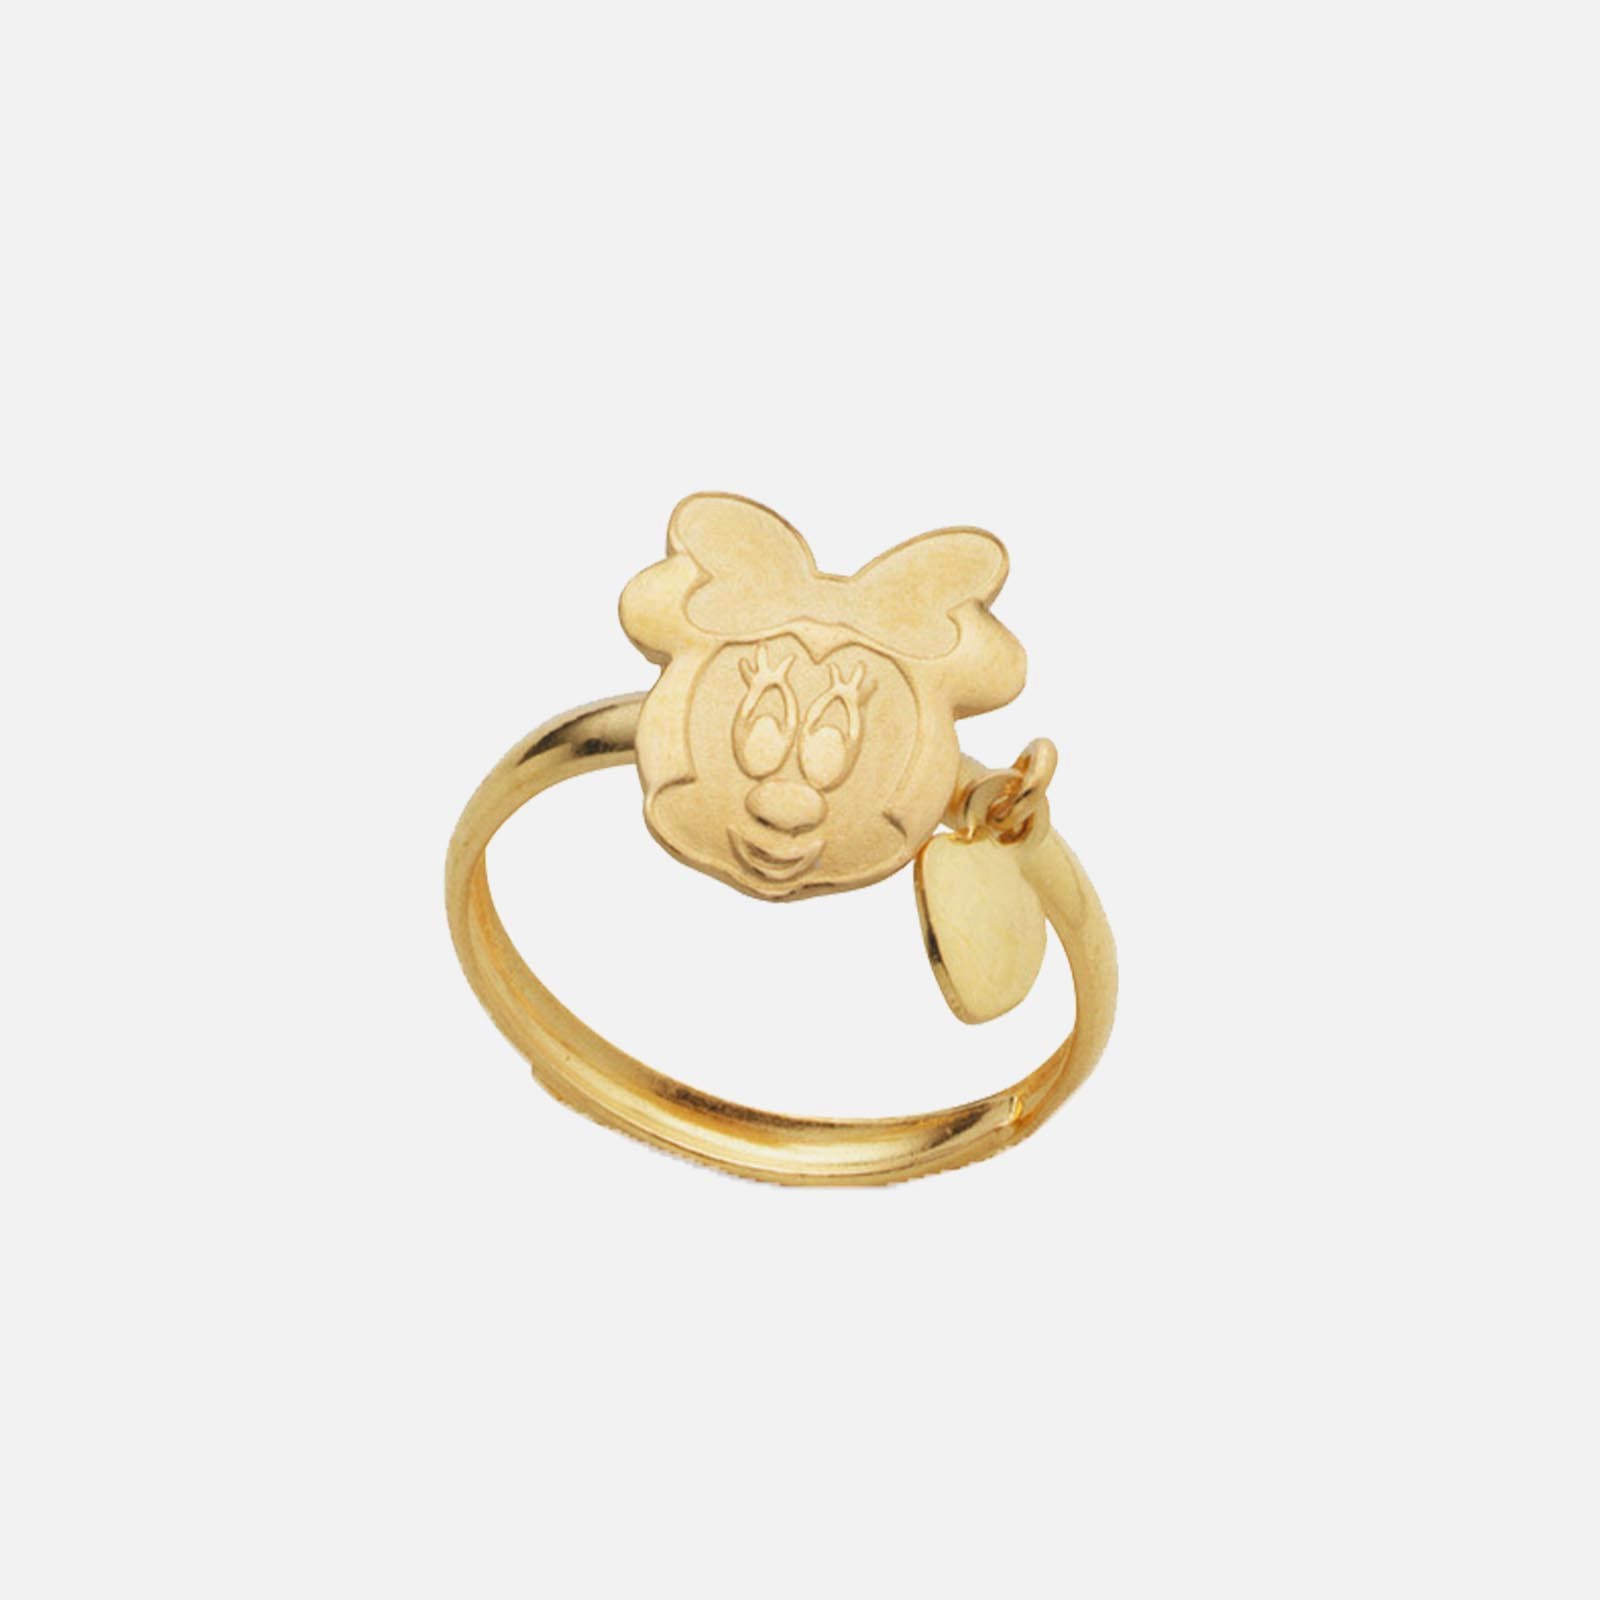 Poh Heng Disney Baby Minnie Ring with Charm in 22K Yellow Gold	